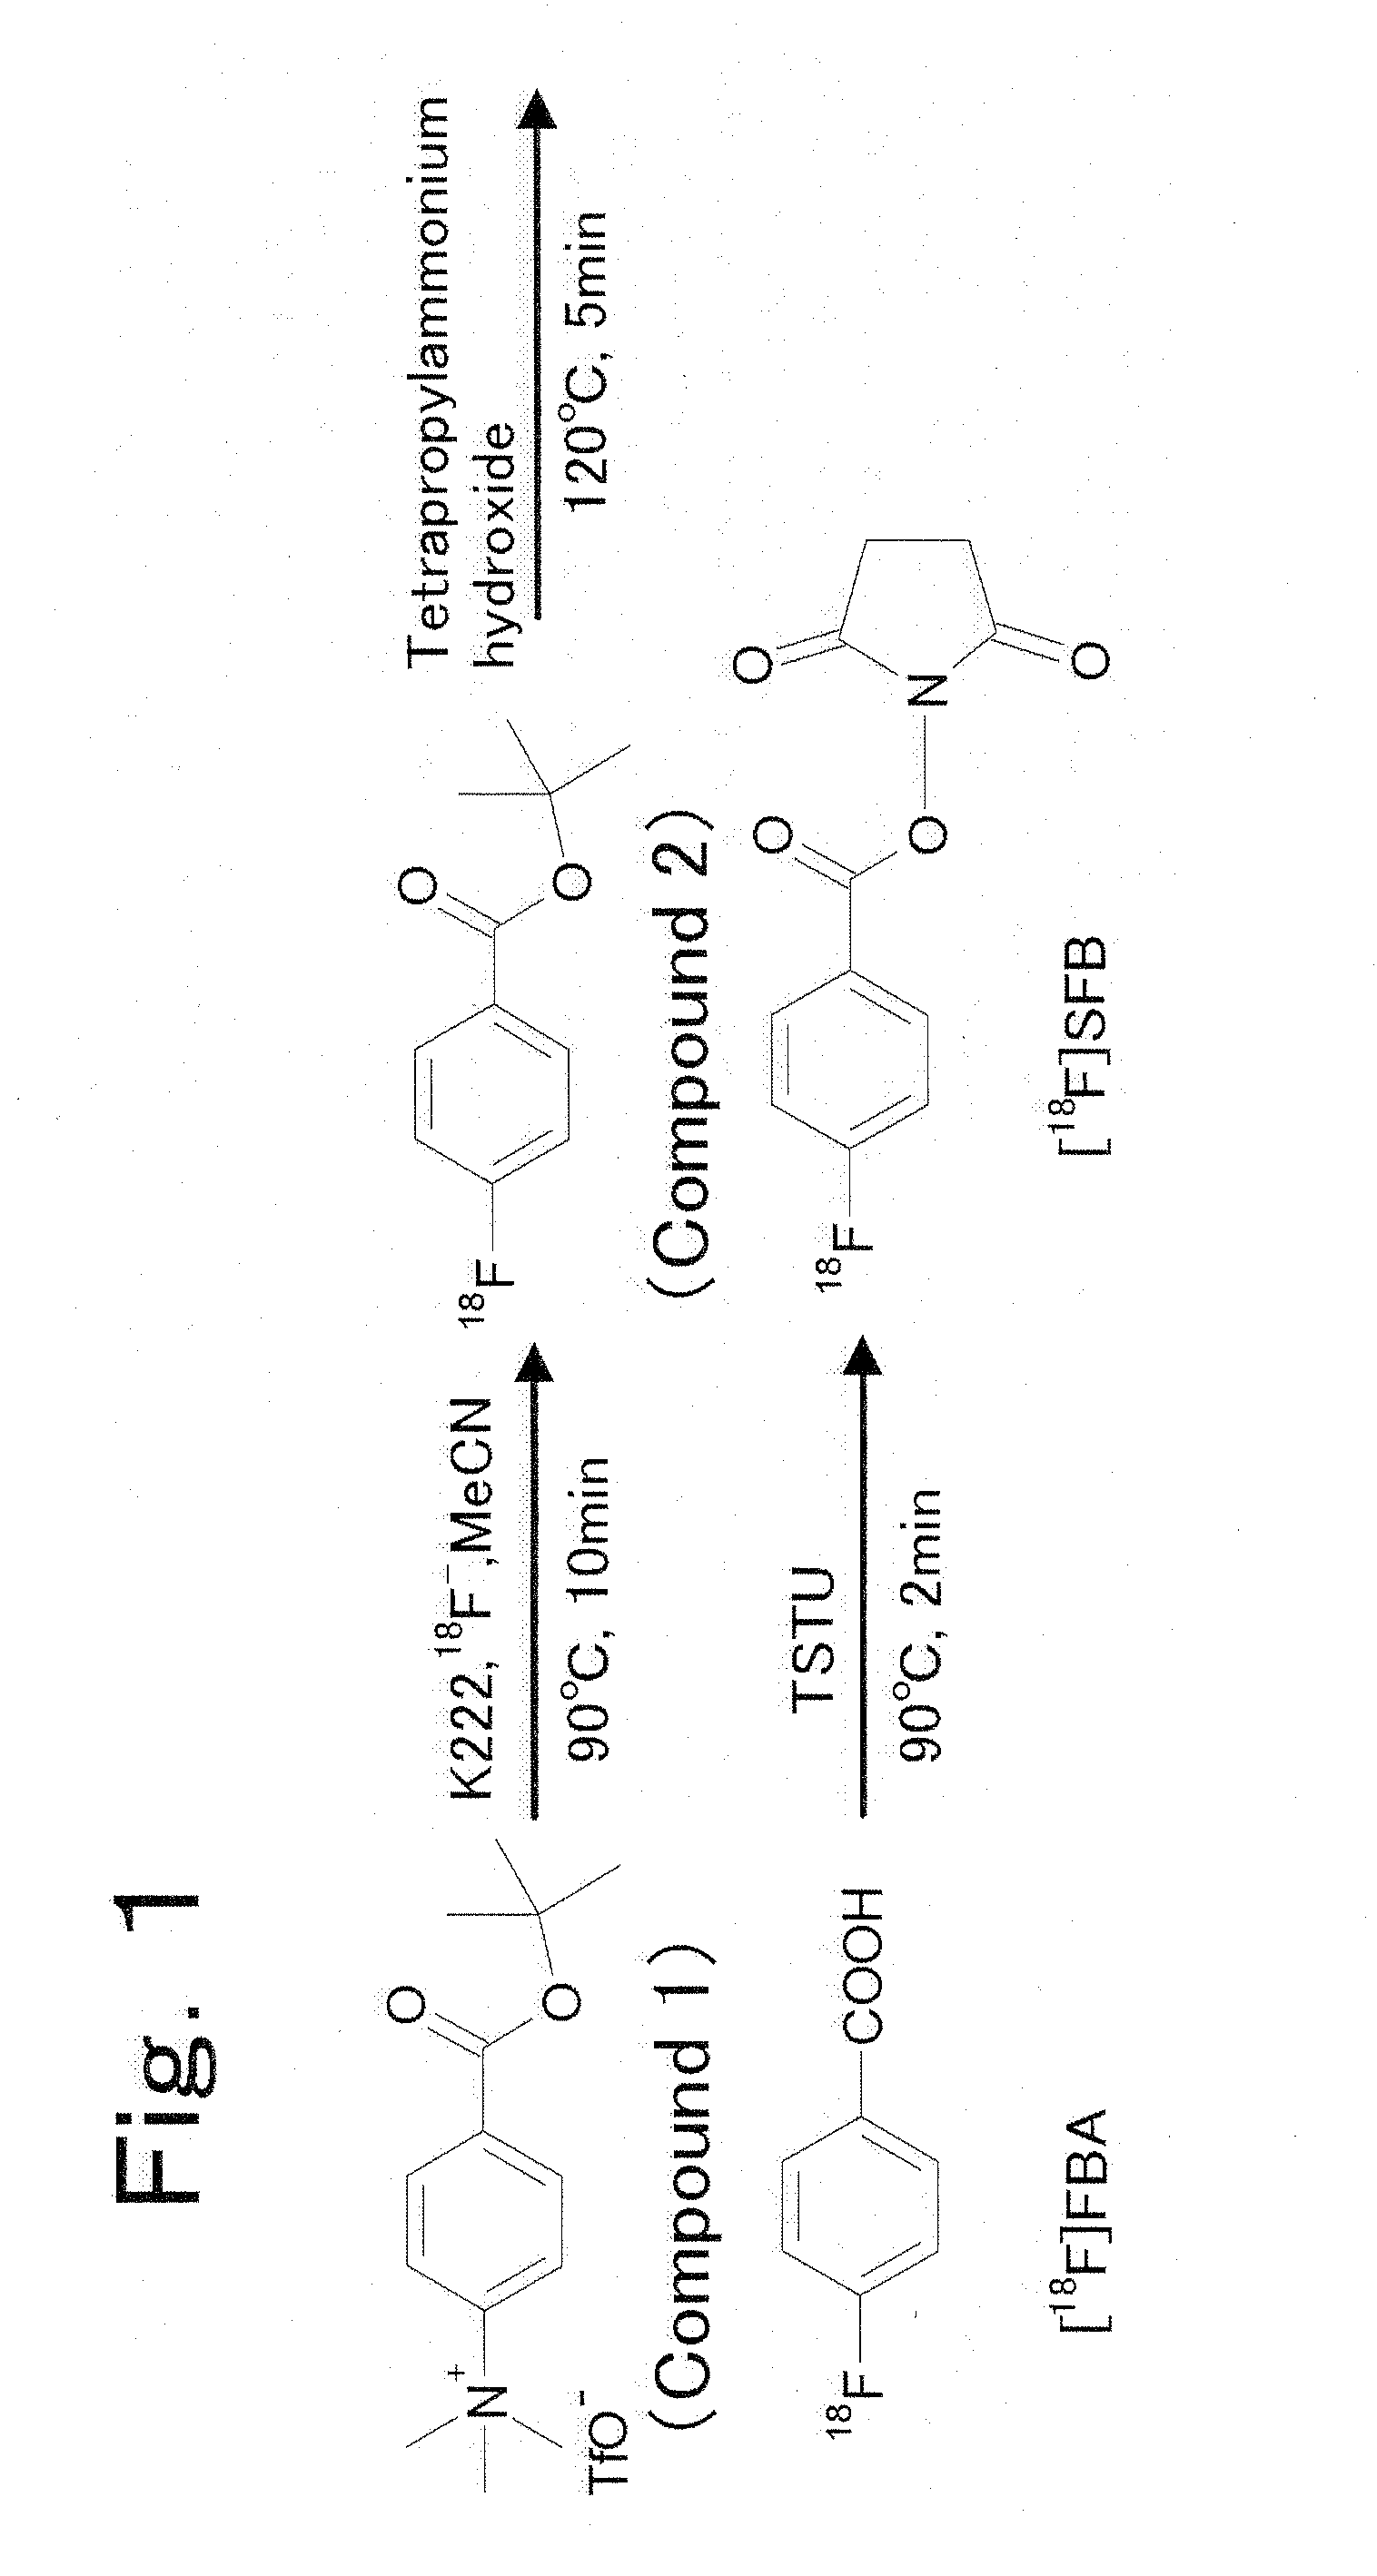 Method for synthesizing [18f]sfb using microsynthesis technique